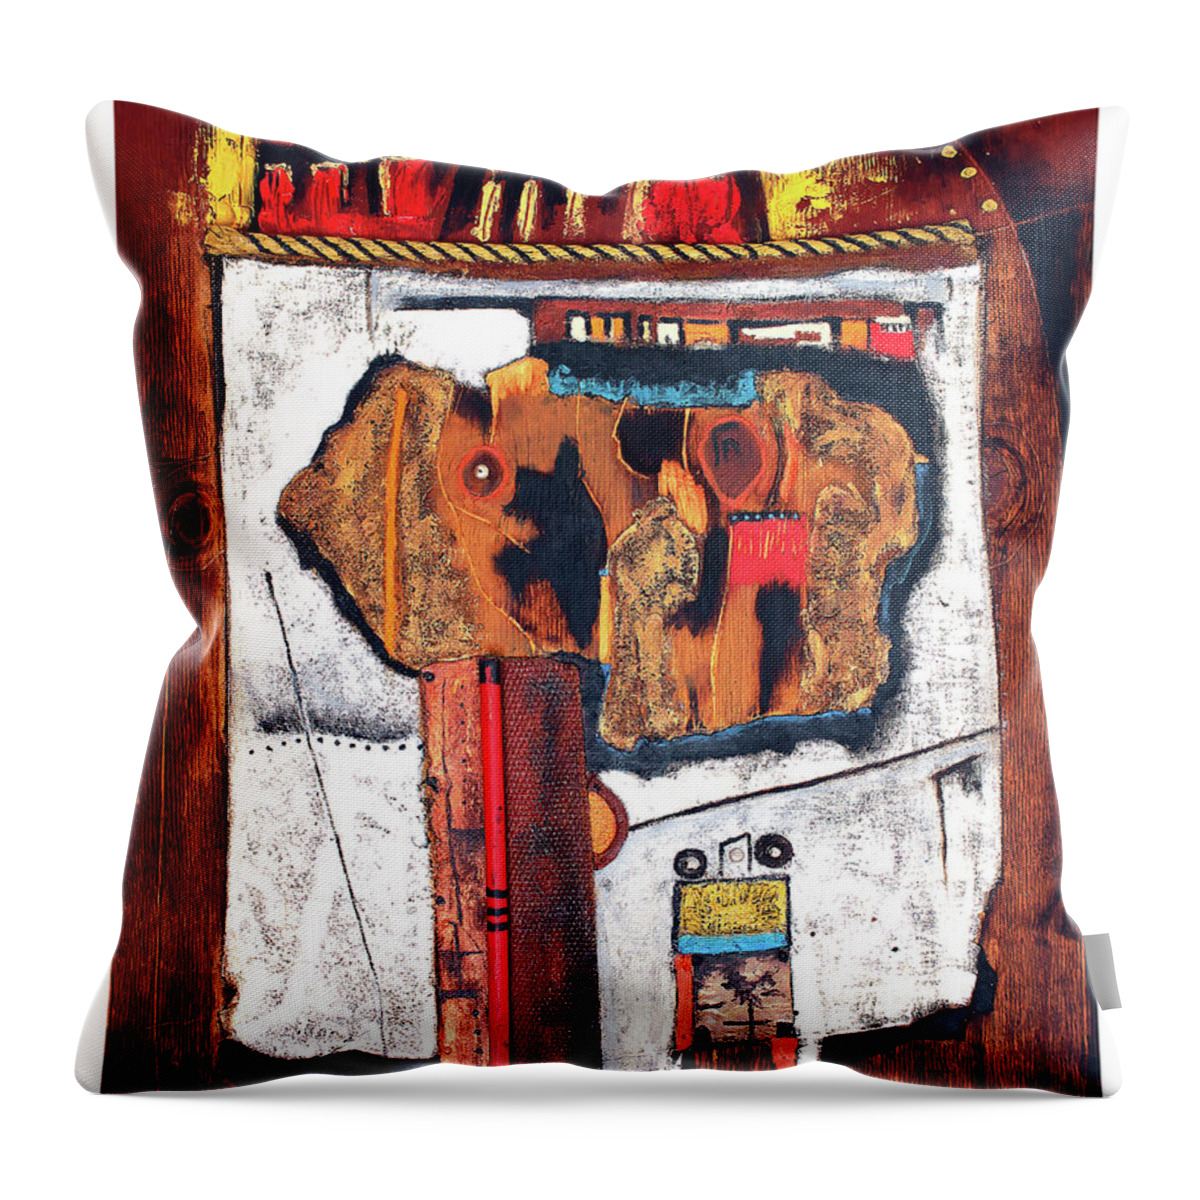 African Art Throw Pillow featuring the painting Door To The Other Side by Michael Nene